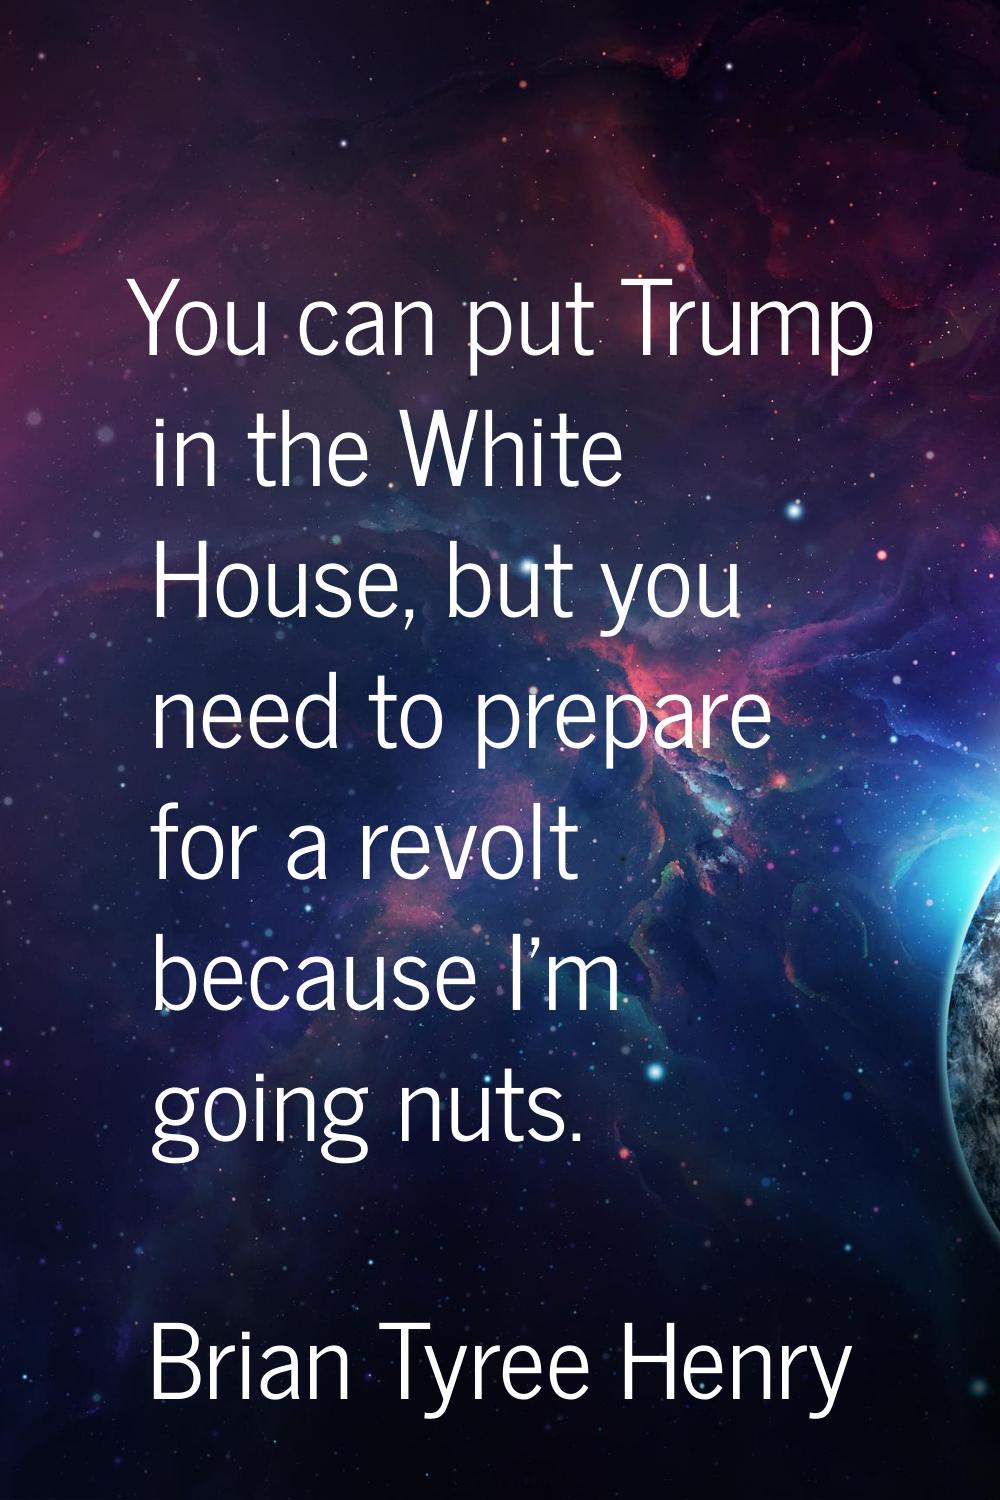 You can put Trump in the White House, but you need to prepare for a revolt because I'm going nuts.